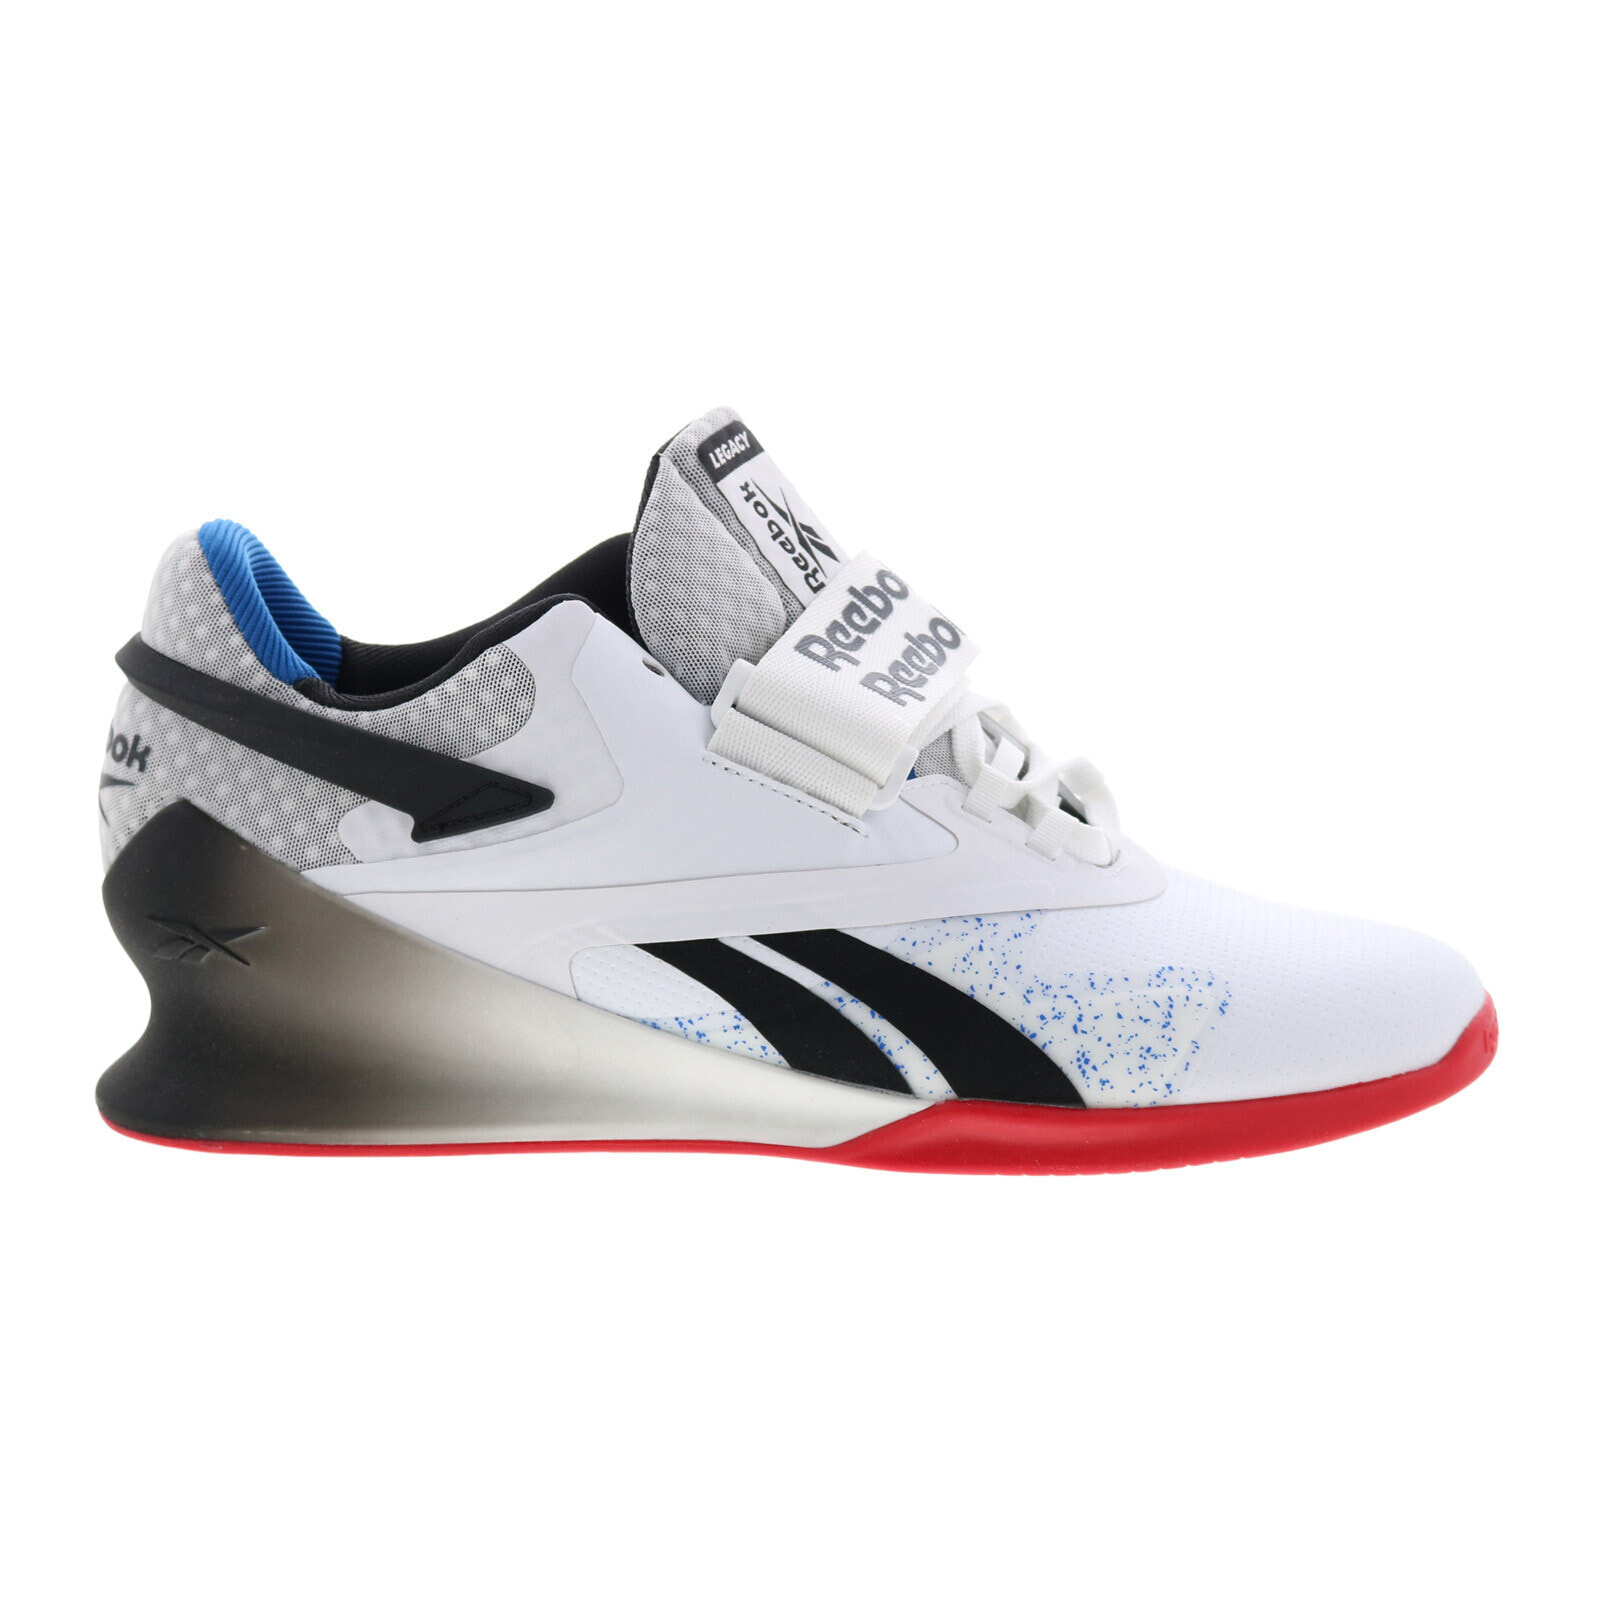 Reebok Legacy Lifter II GY6380 Mens White Athletic Weightlifting Shoes